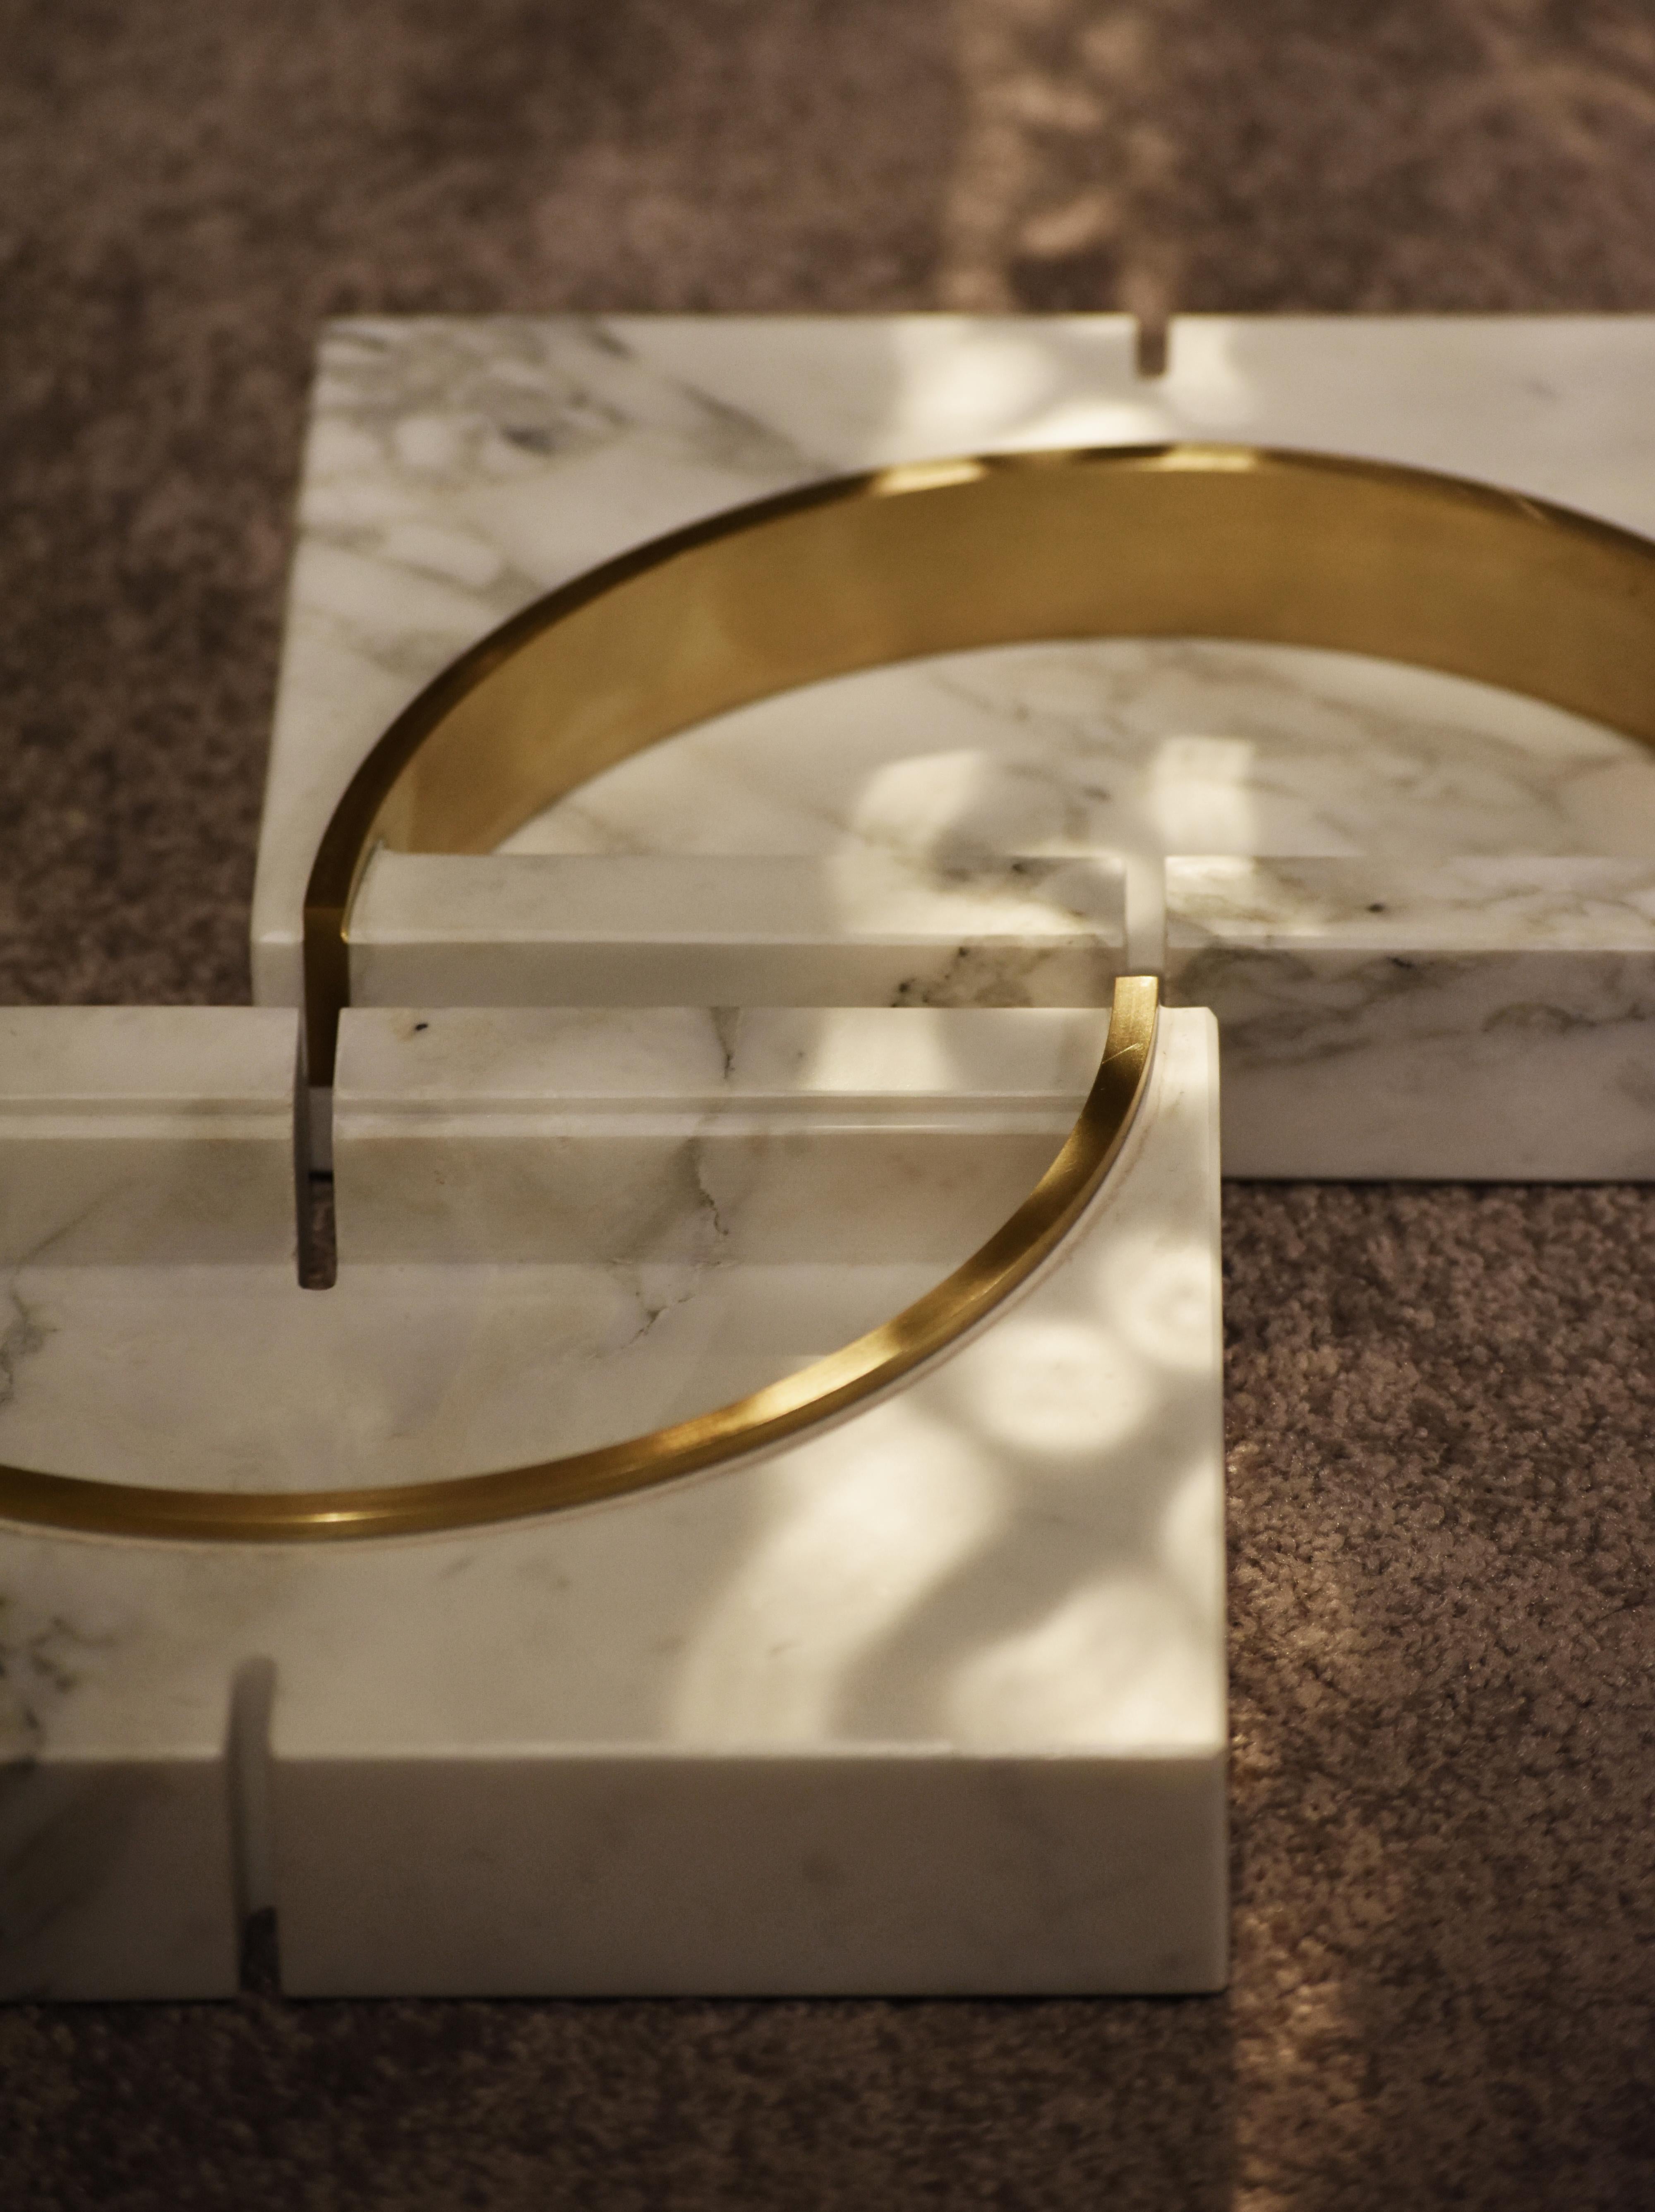 Aureo is the name of this ashtrays or vase in marble and brass detail handmade design in Italy designed by Andrea Bonini.
Scolptural art piece in white carrara marble (avviable in other marbles) with a brass brushed finish metal, can be used for